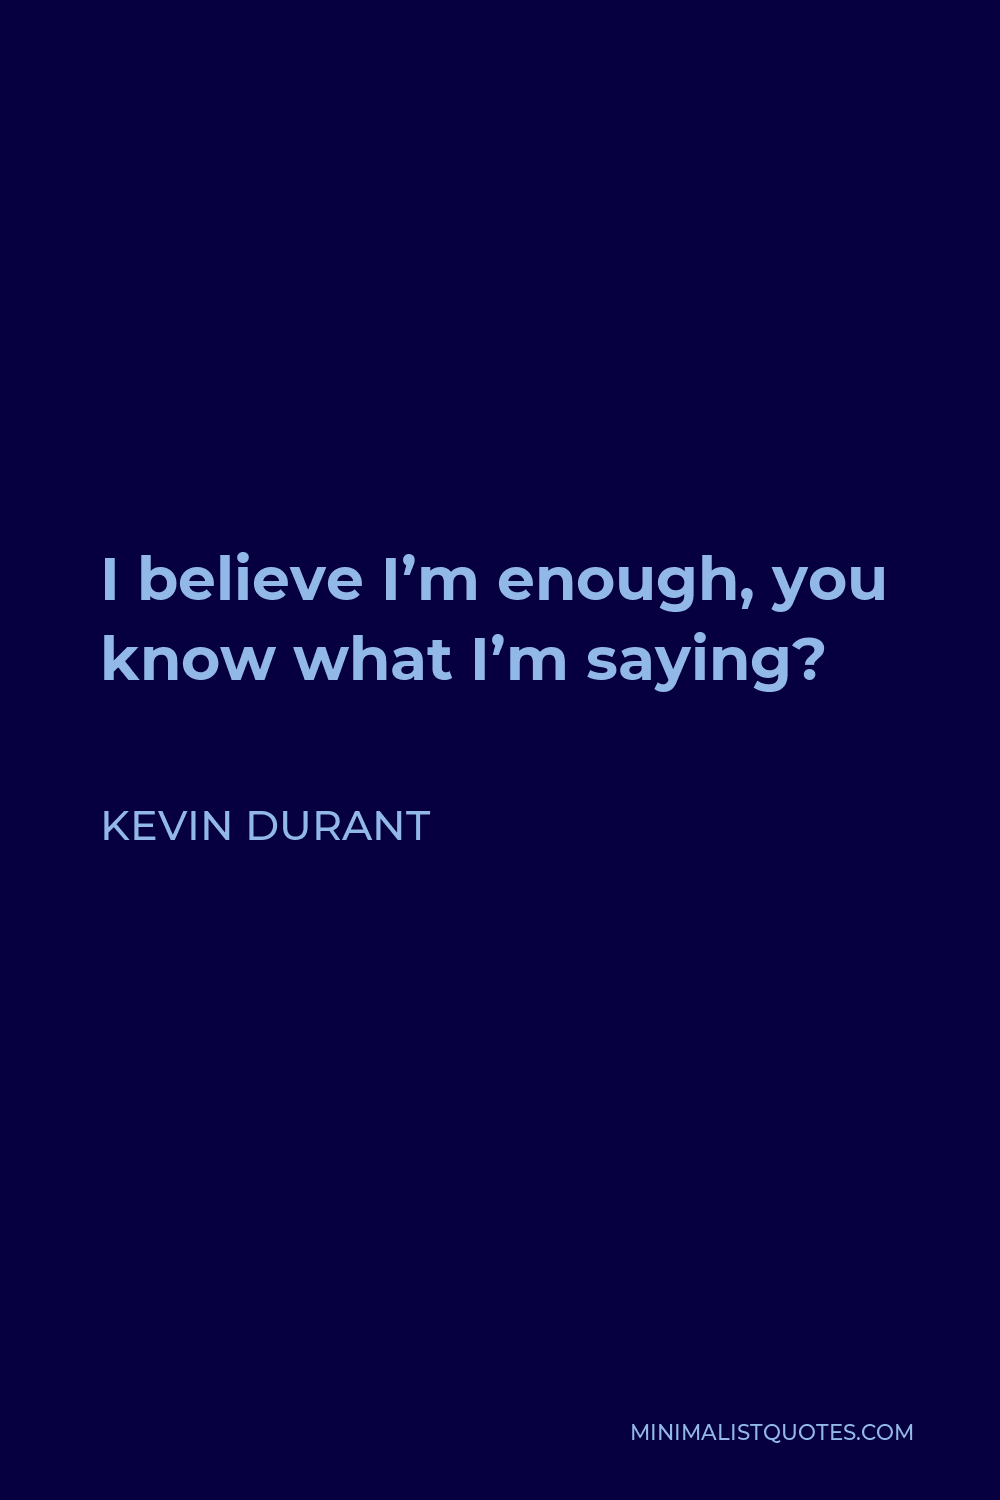 Kevin Durant Quote - I believe I’m enough, you know what I’m saying?